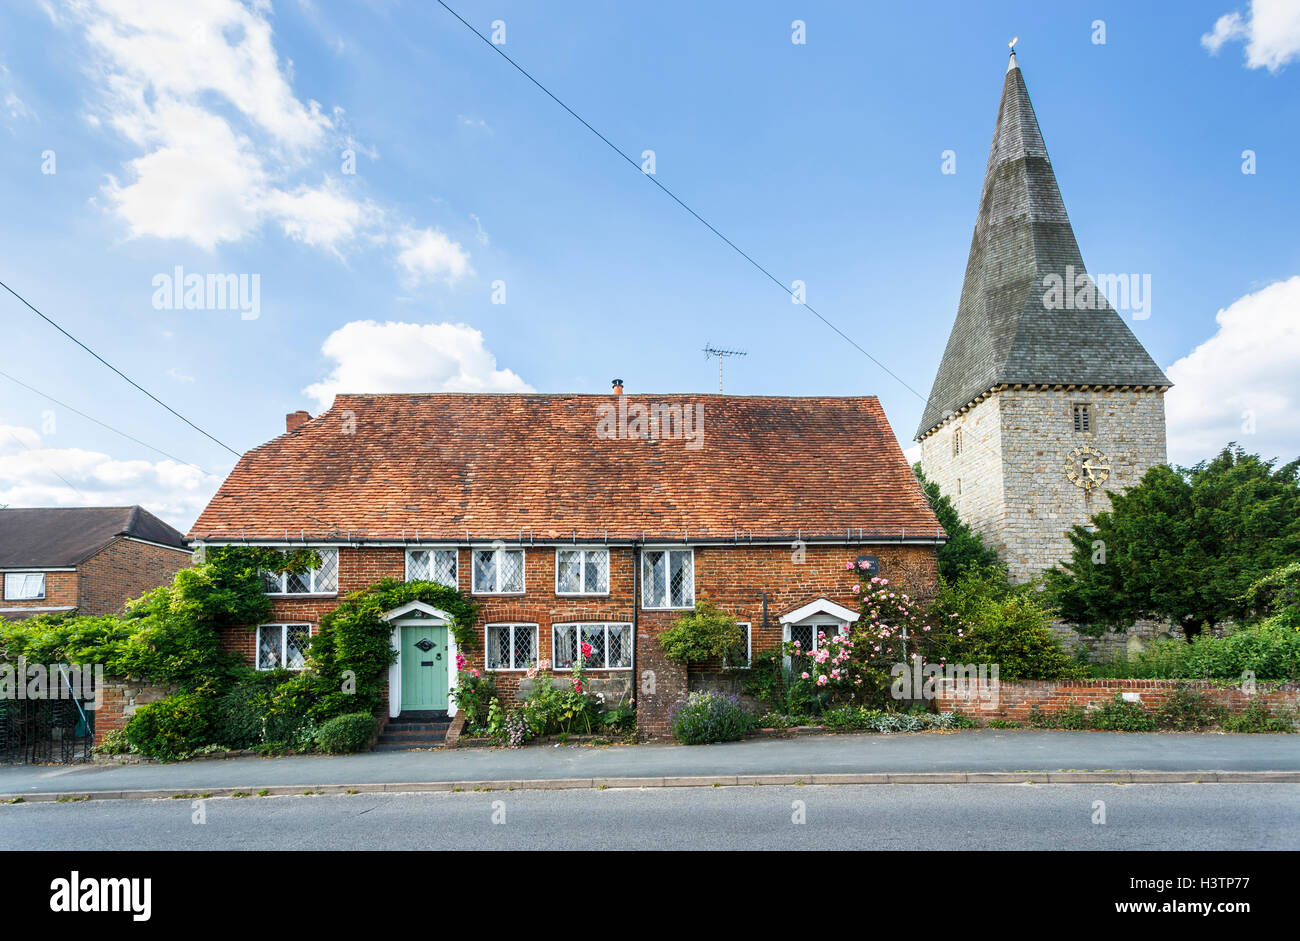 Fourteenth century cottage and St Peter's church spire in Ash near Guildford, Surrey with hollyhocks, roses around the windows Stock Photo